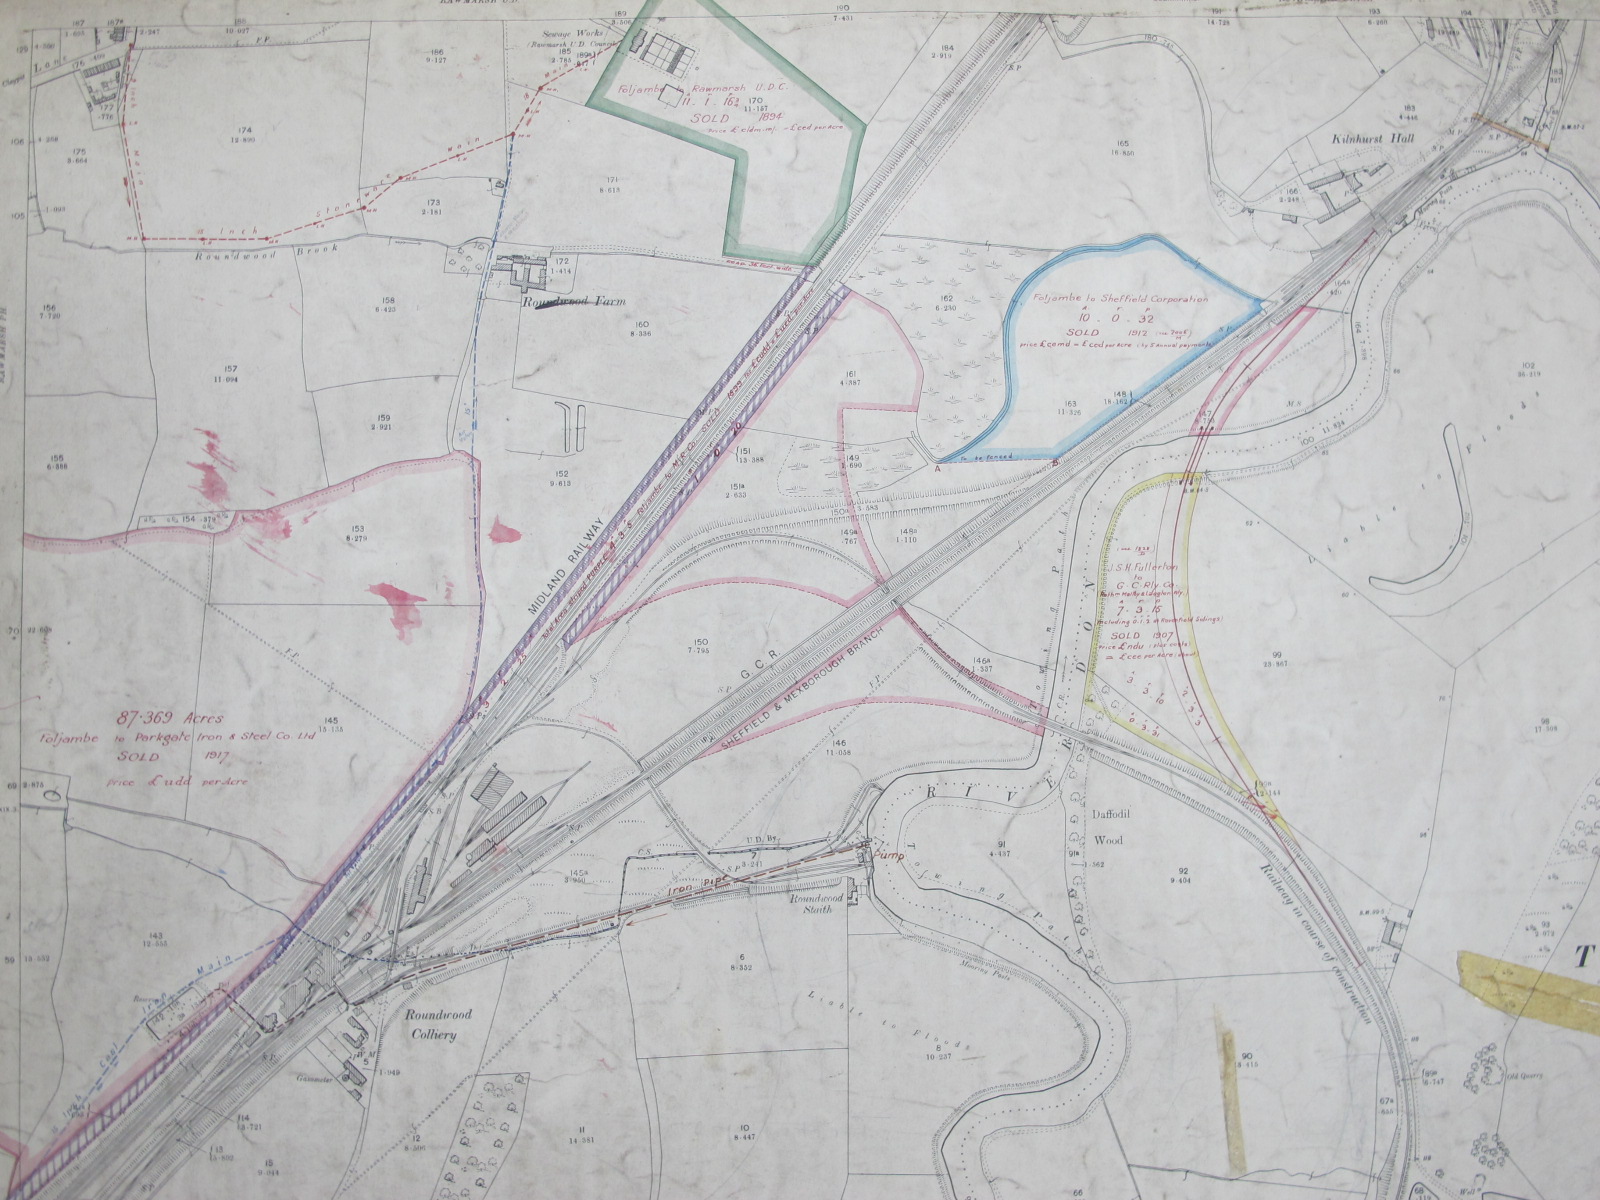 West Riding Yorkshire Maps, Rotherham and area - some dates noted 1902, 1903, 1922, 1935, various - Image 11 of 11